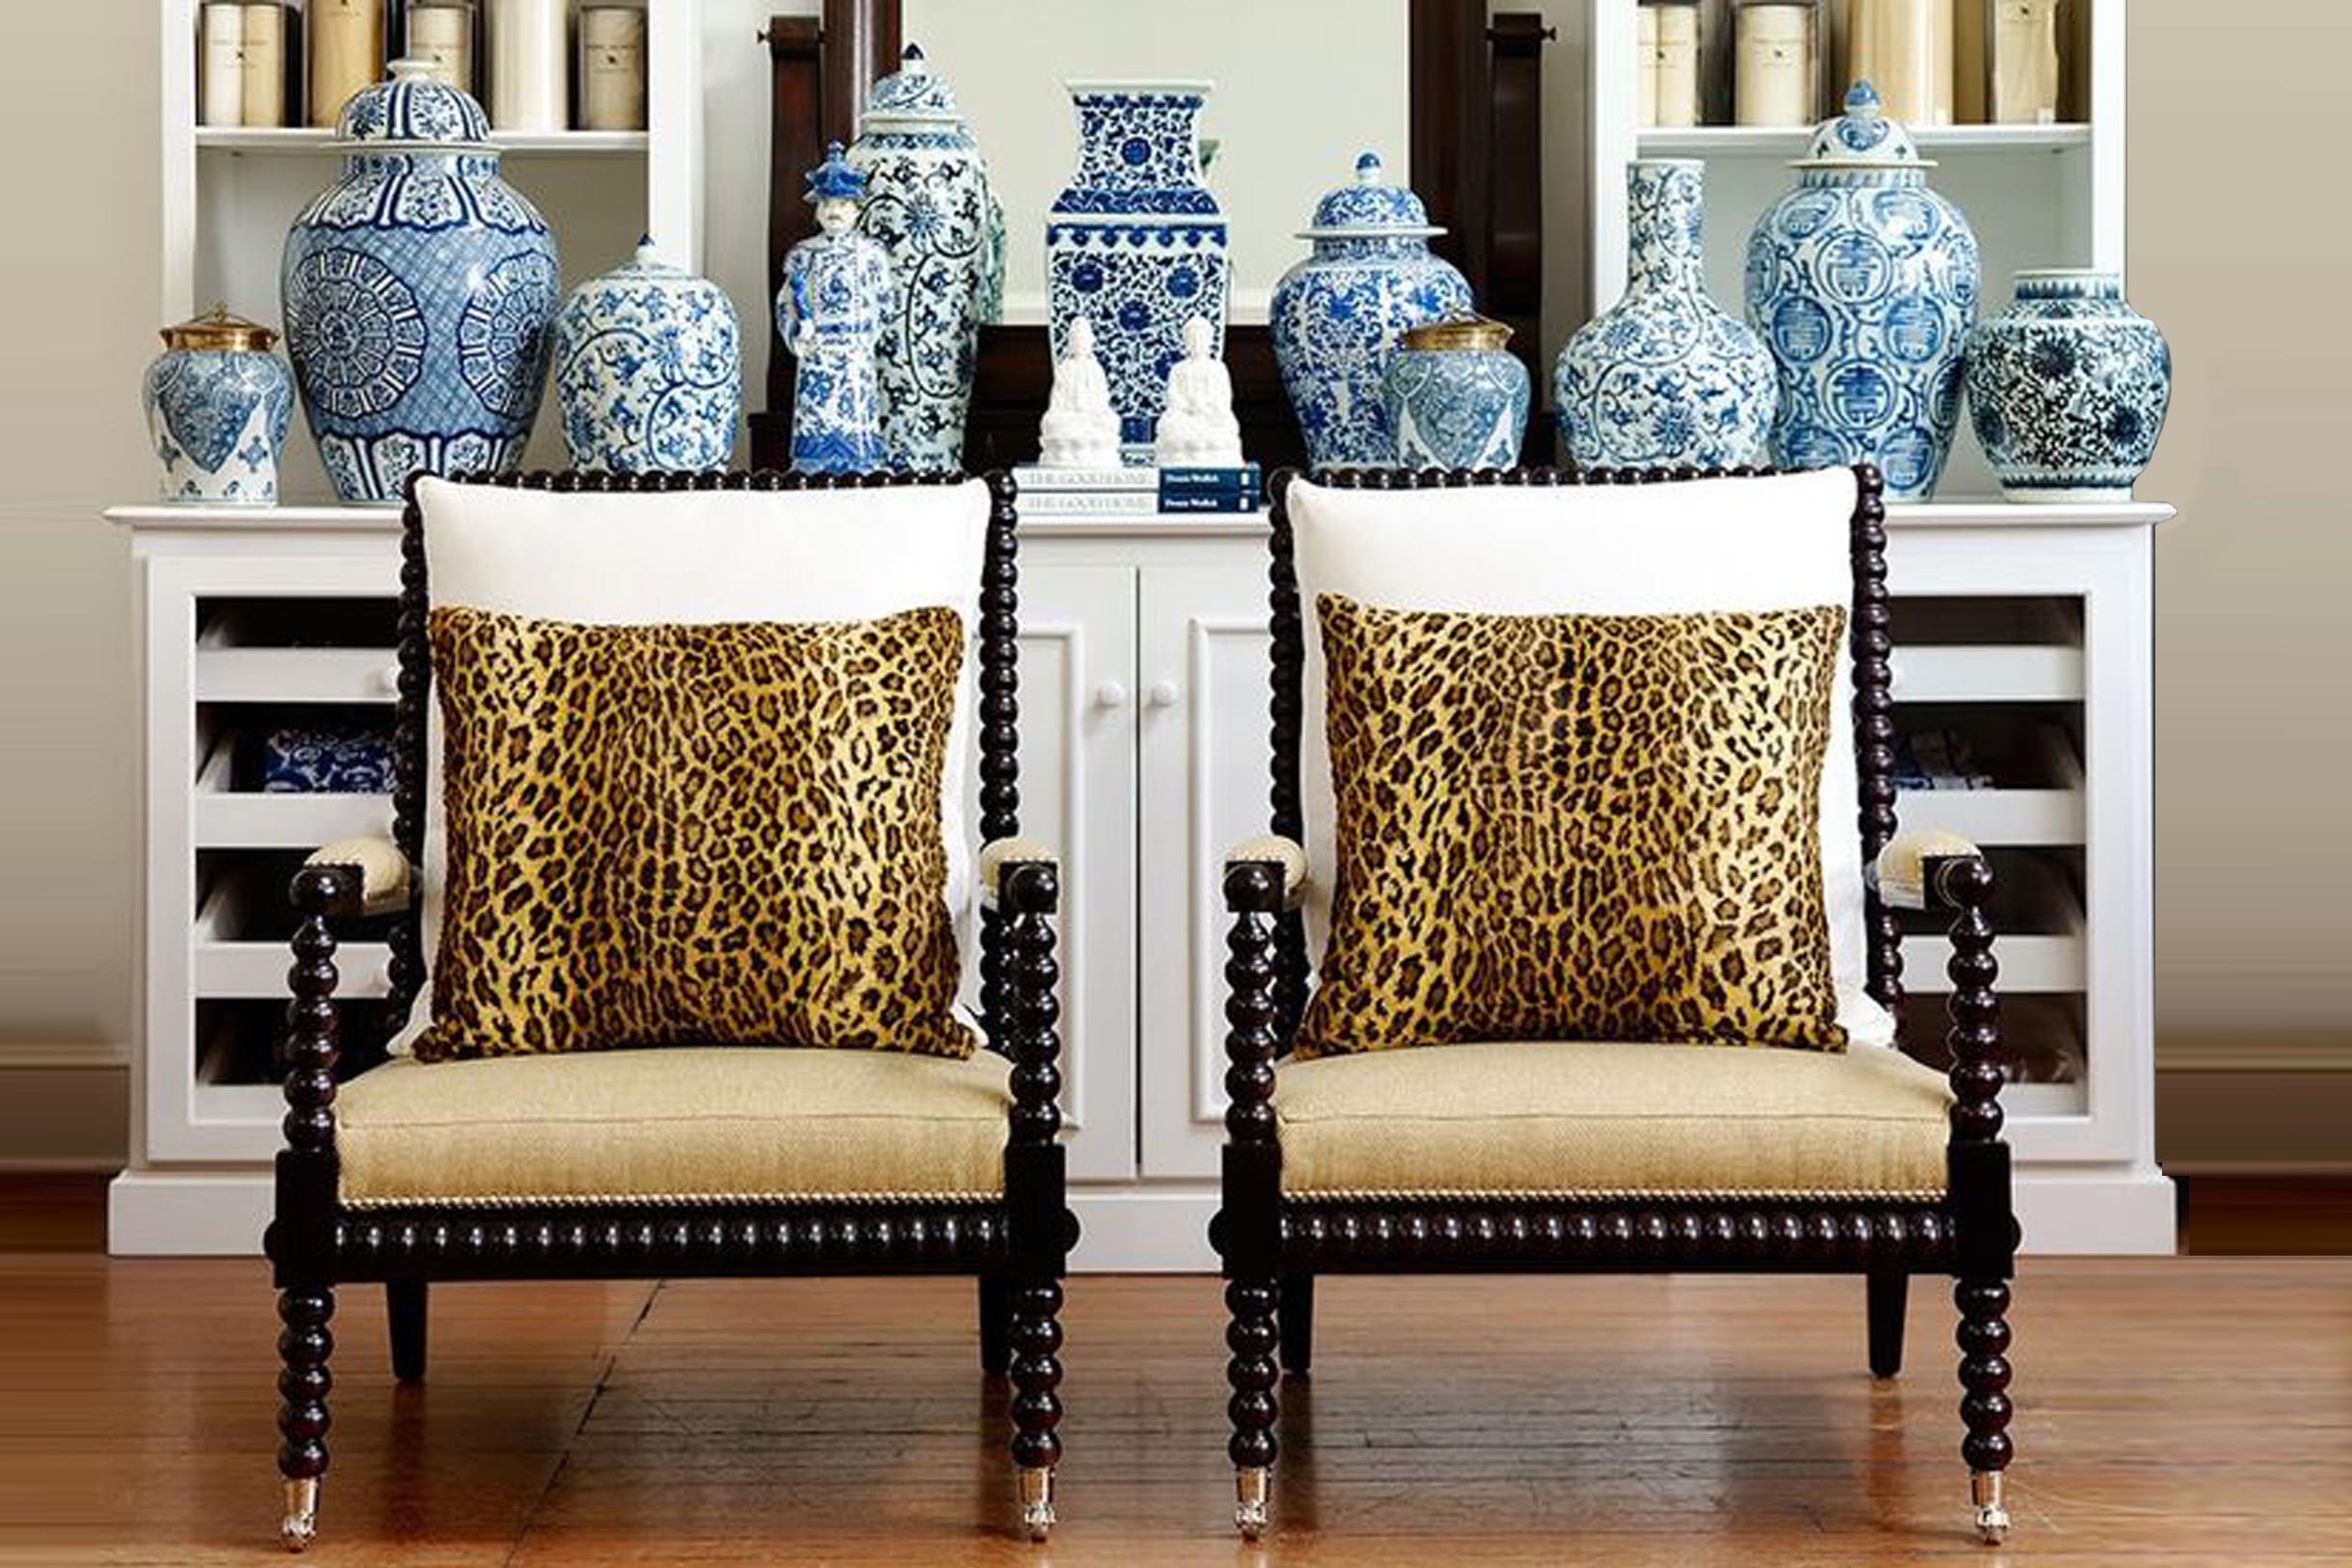 A Touch Of Drama 5 Ways To Use Accent Furniture